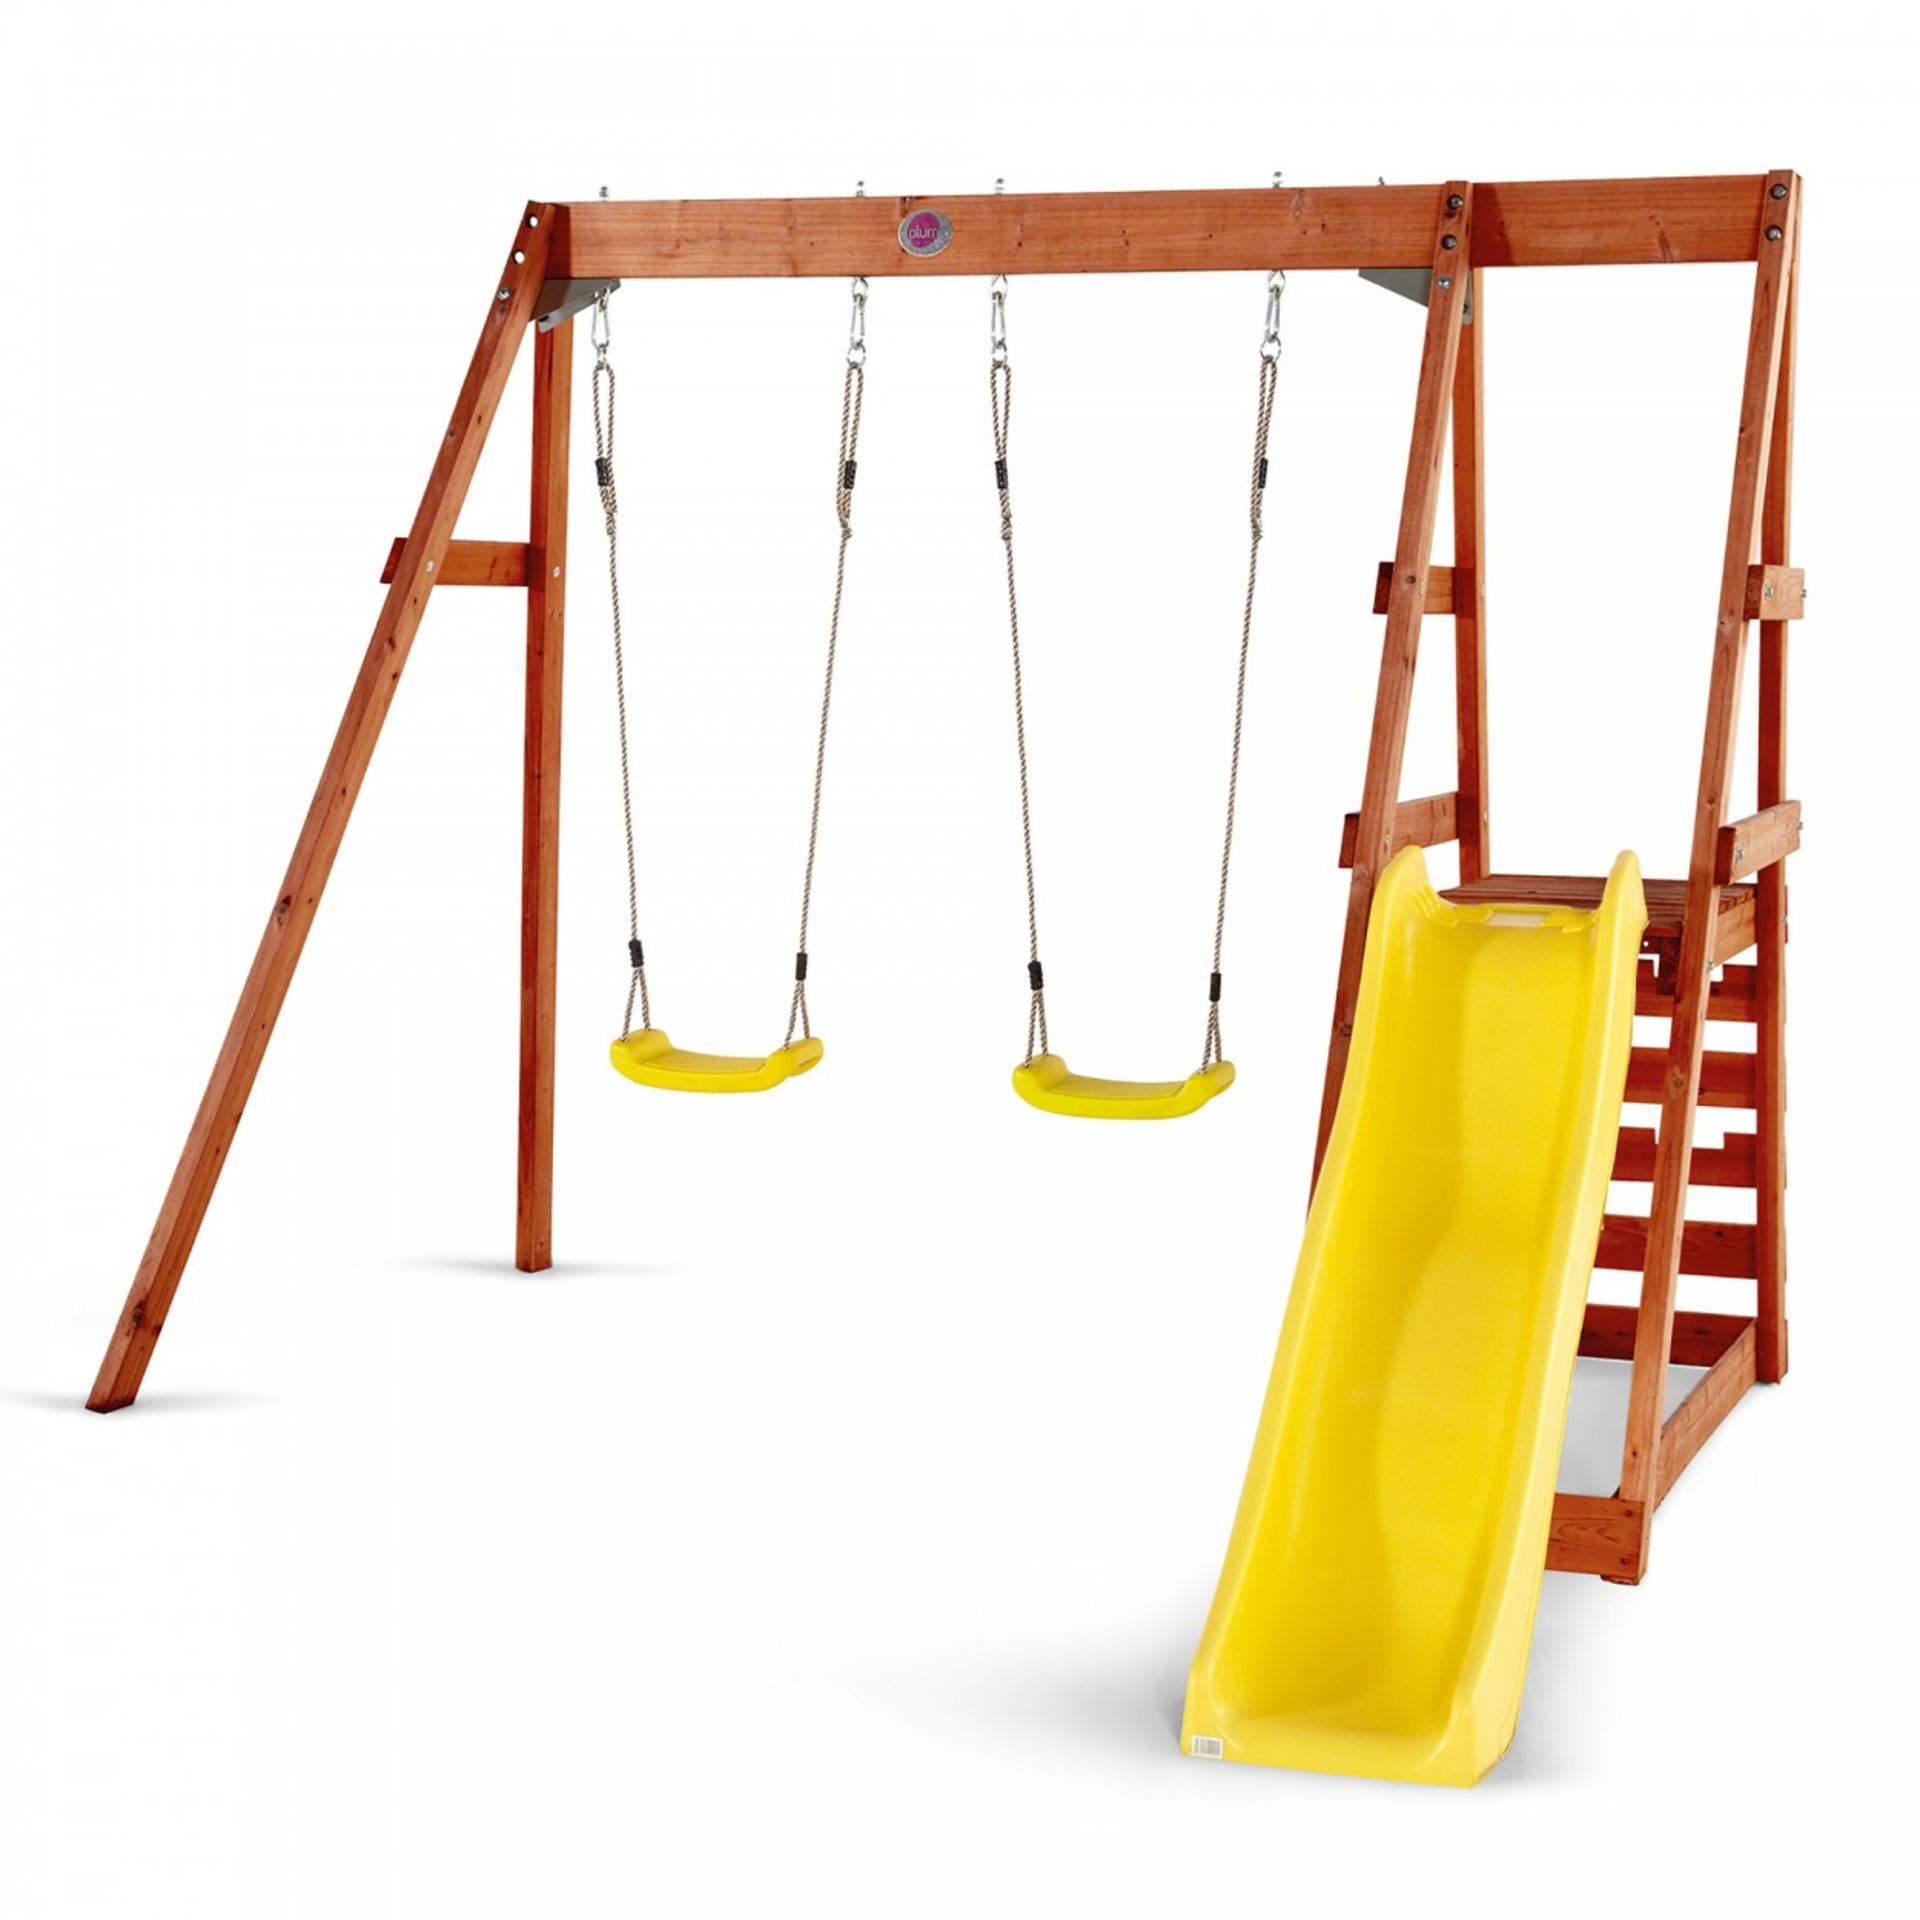 1 x Plum Double Swing with Glider Wooden Garden Swing Set. RRP £249.99. A fabulous swing set for